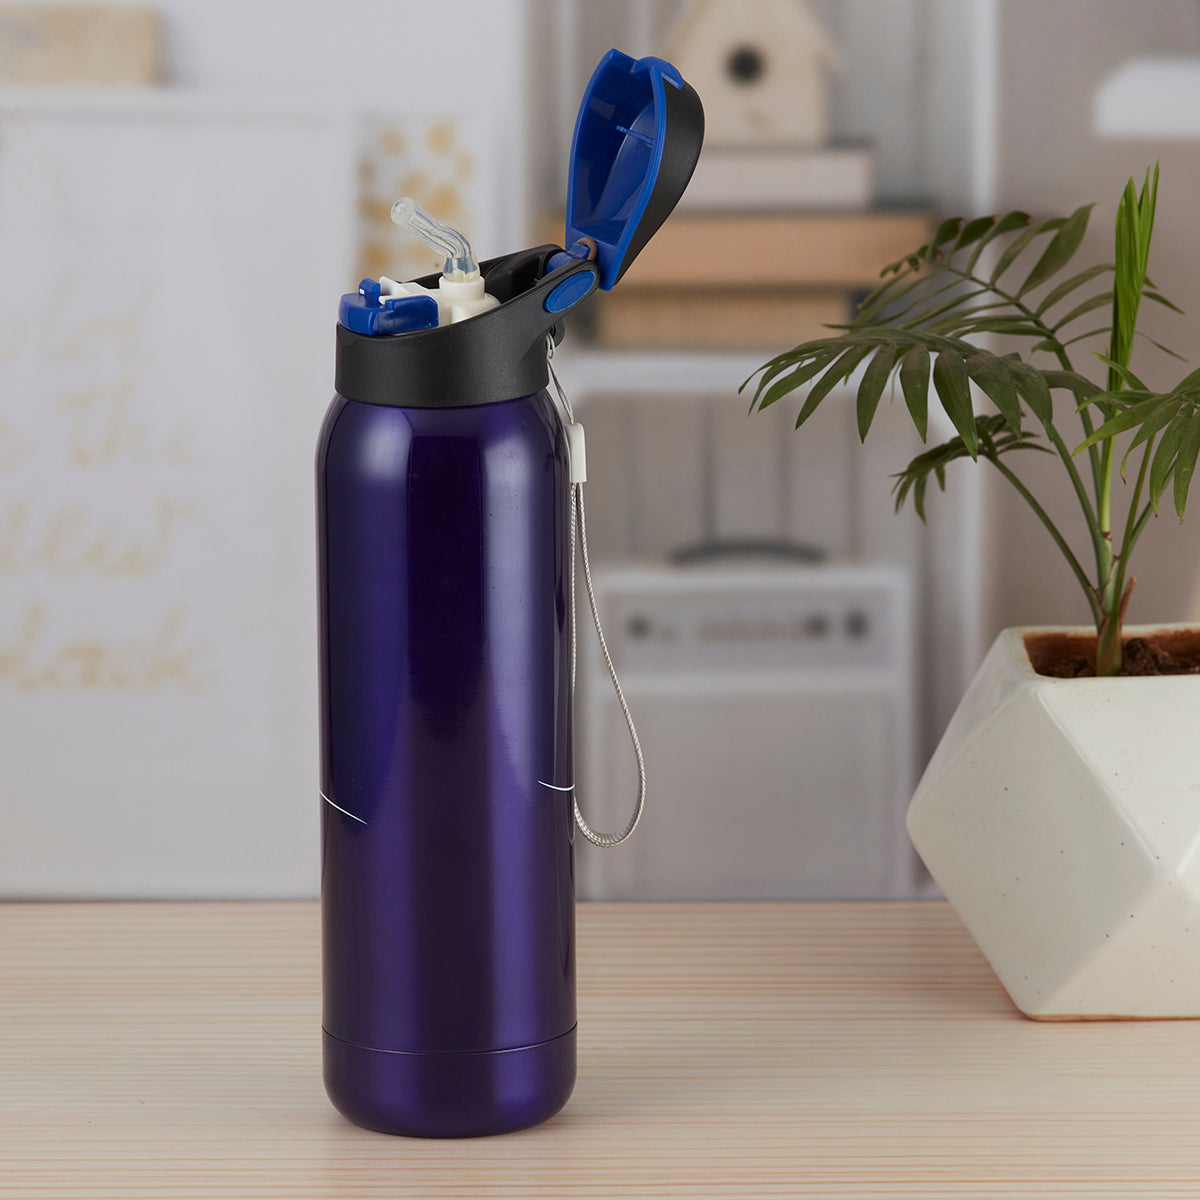 Stainless Steel Vacuum Insulated double wall Water Bottle - 500ml (8426-1-C)